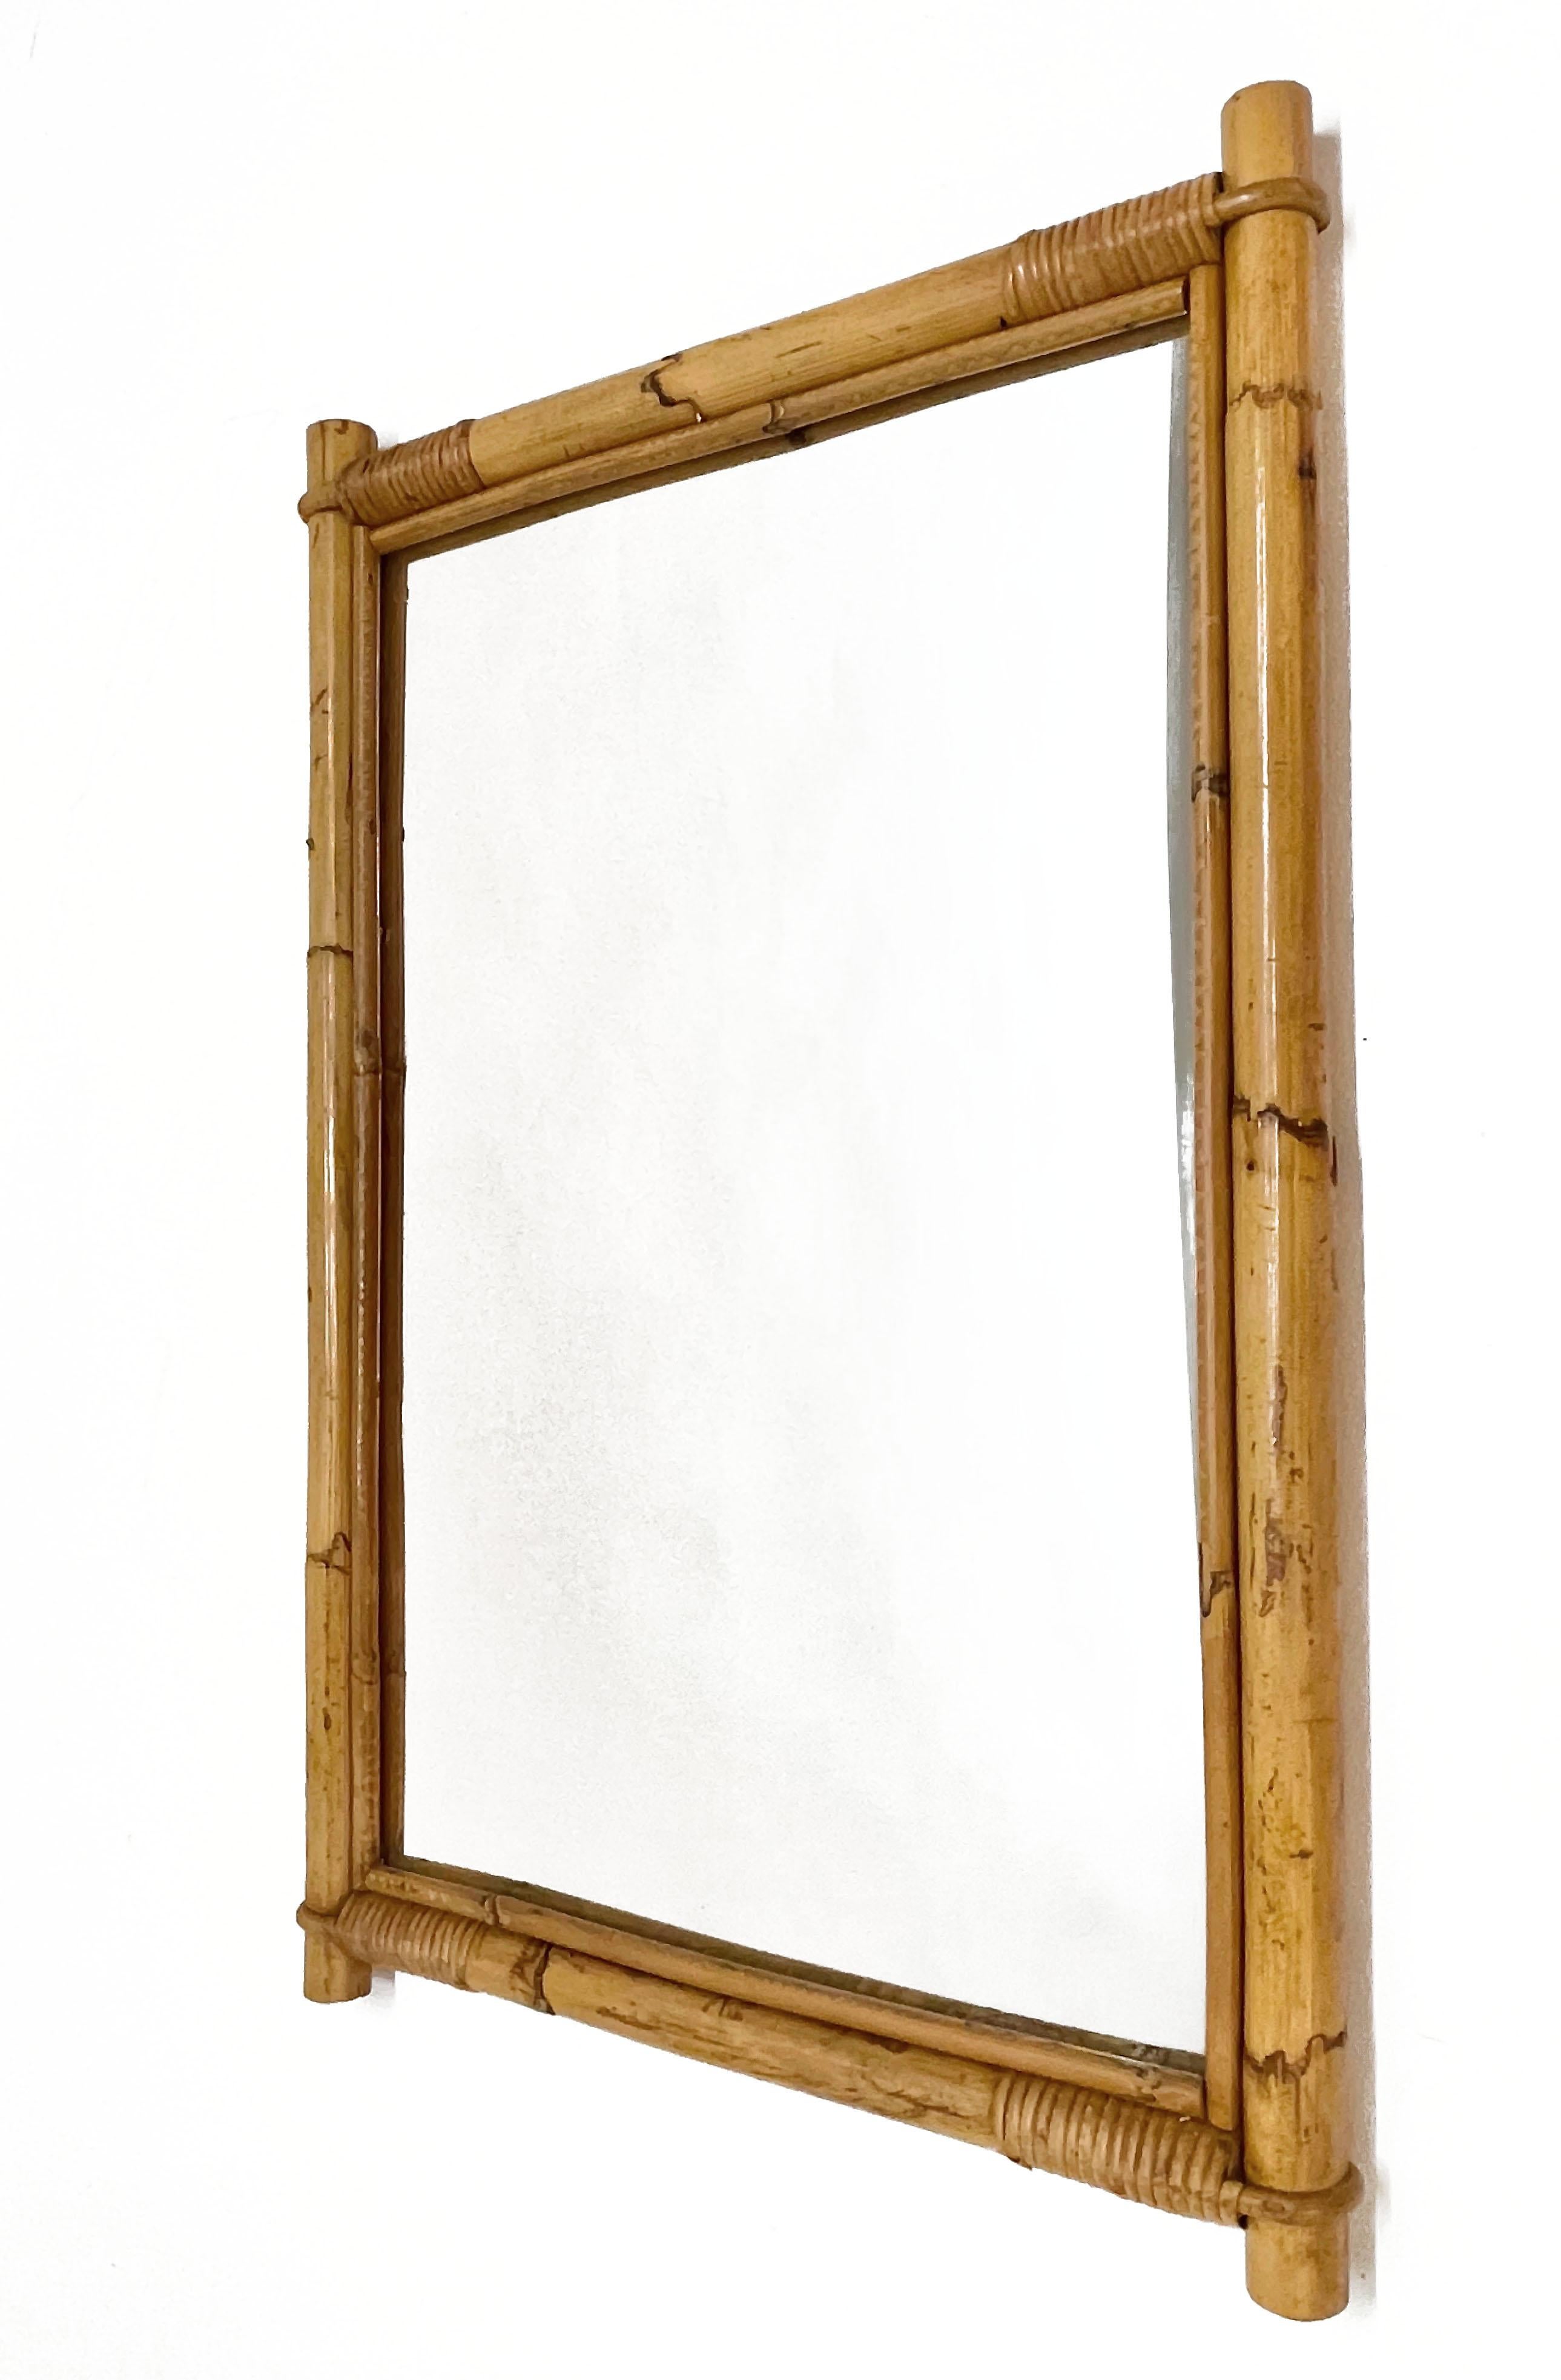 Wonderful midcentury rectangular mirror with a double bamboo cane weaved wicker frame. This amazing item was produced in Italy during the 1960s.

The way in which straight bamboo lines integrate with glass integrate is fantastic and coveys superb